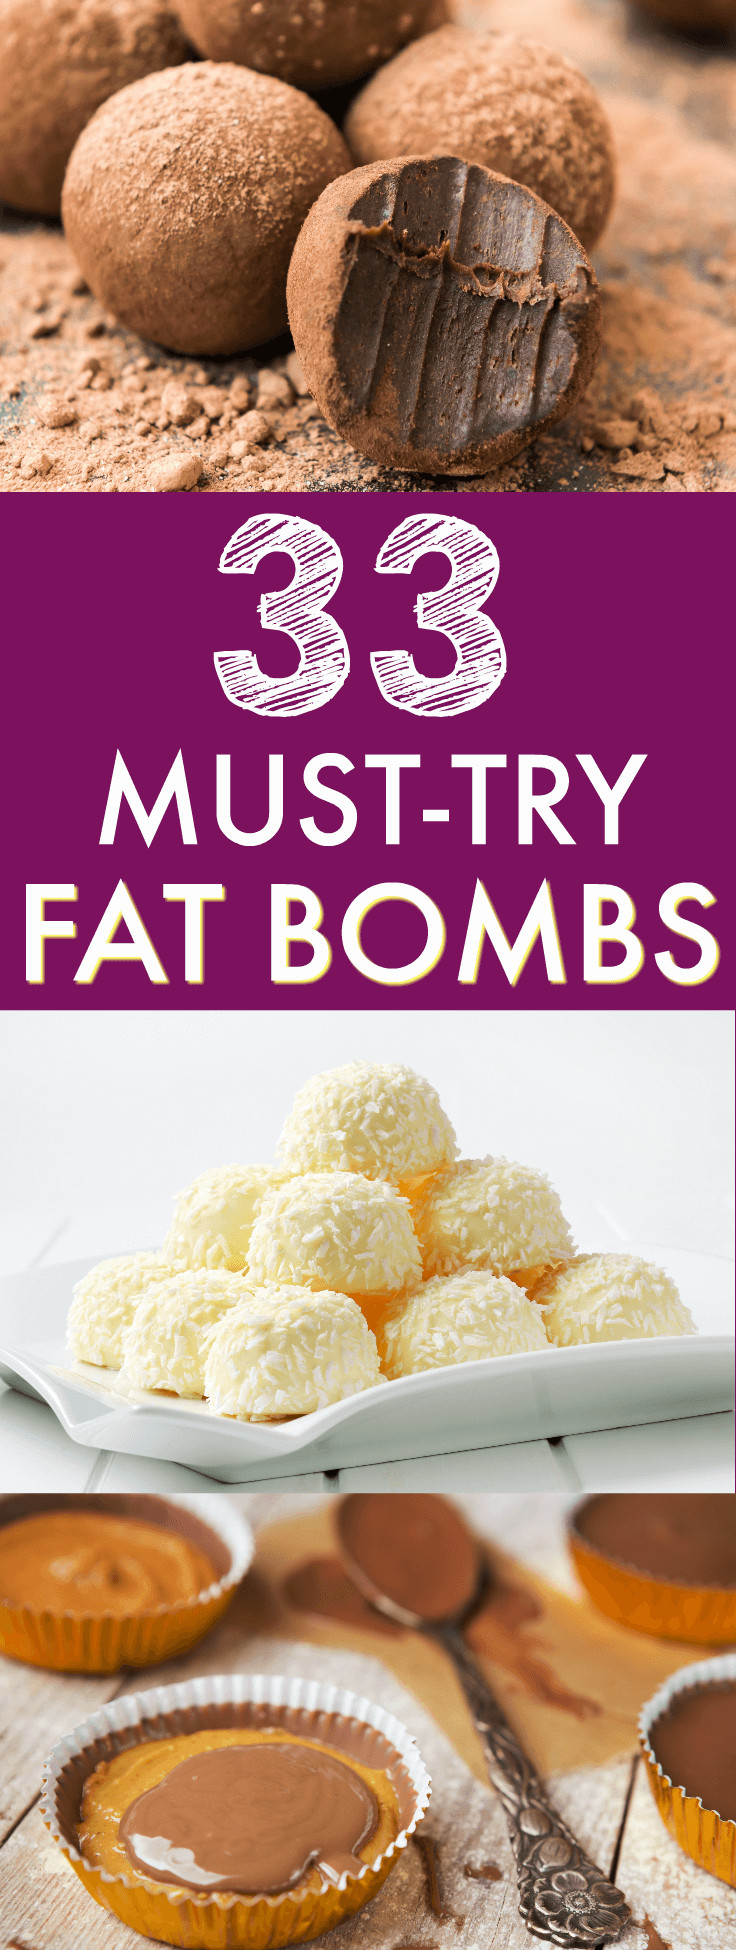 Low Fat Keto Recipes 33 Delicious Fat Bombs Recipes for Keto or Low Carb Diets